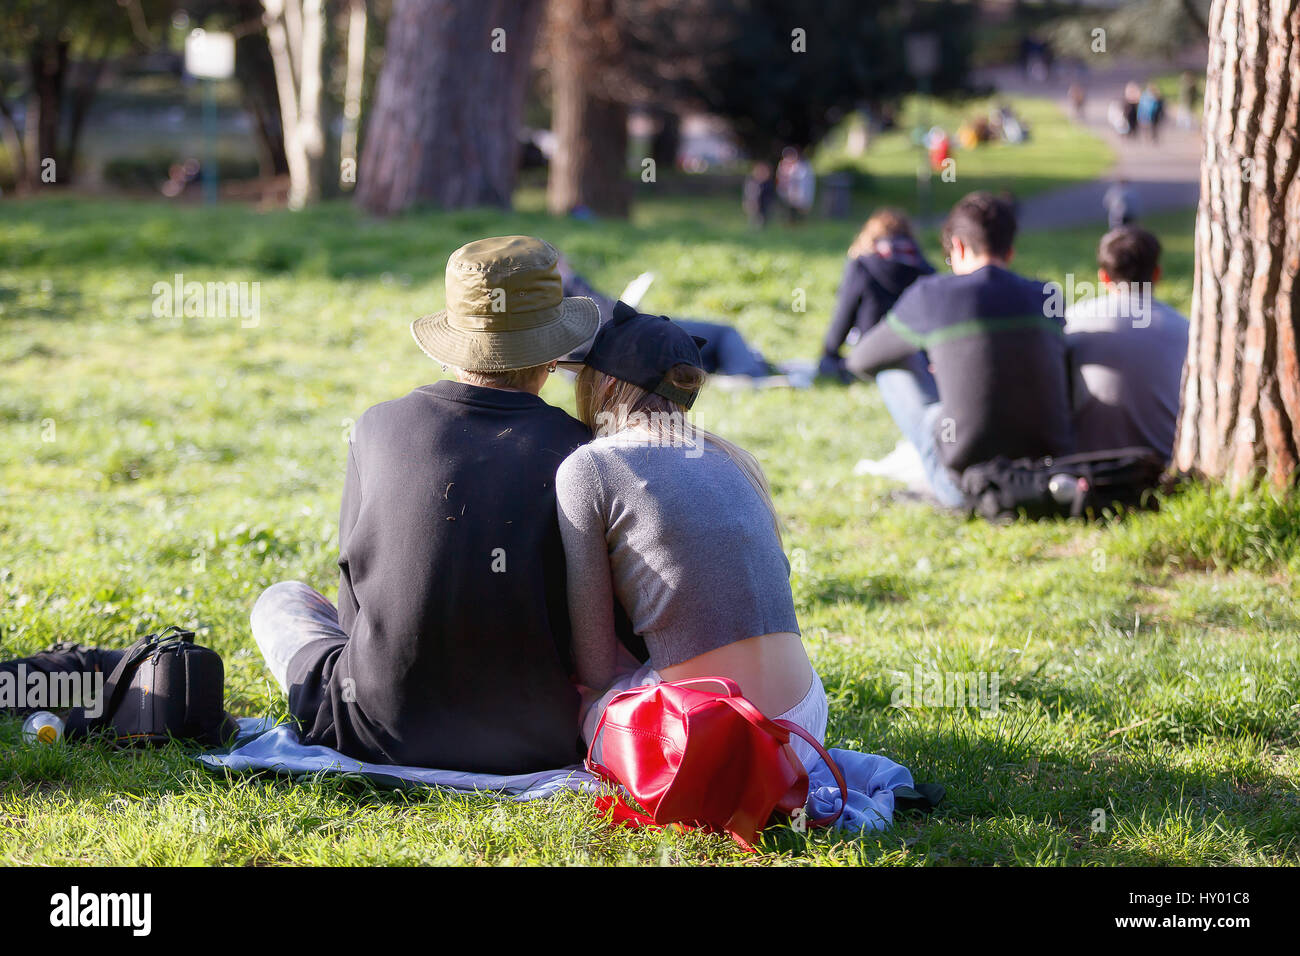 Rome, Italy - February 26, 2017: A pair of young lovers sitting on the green lawn of the Villa Borghese park on a spring day. Stock Photo